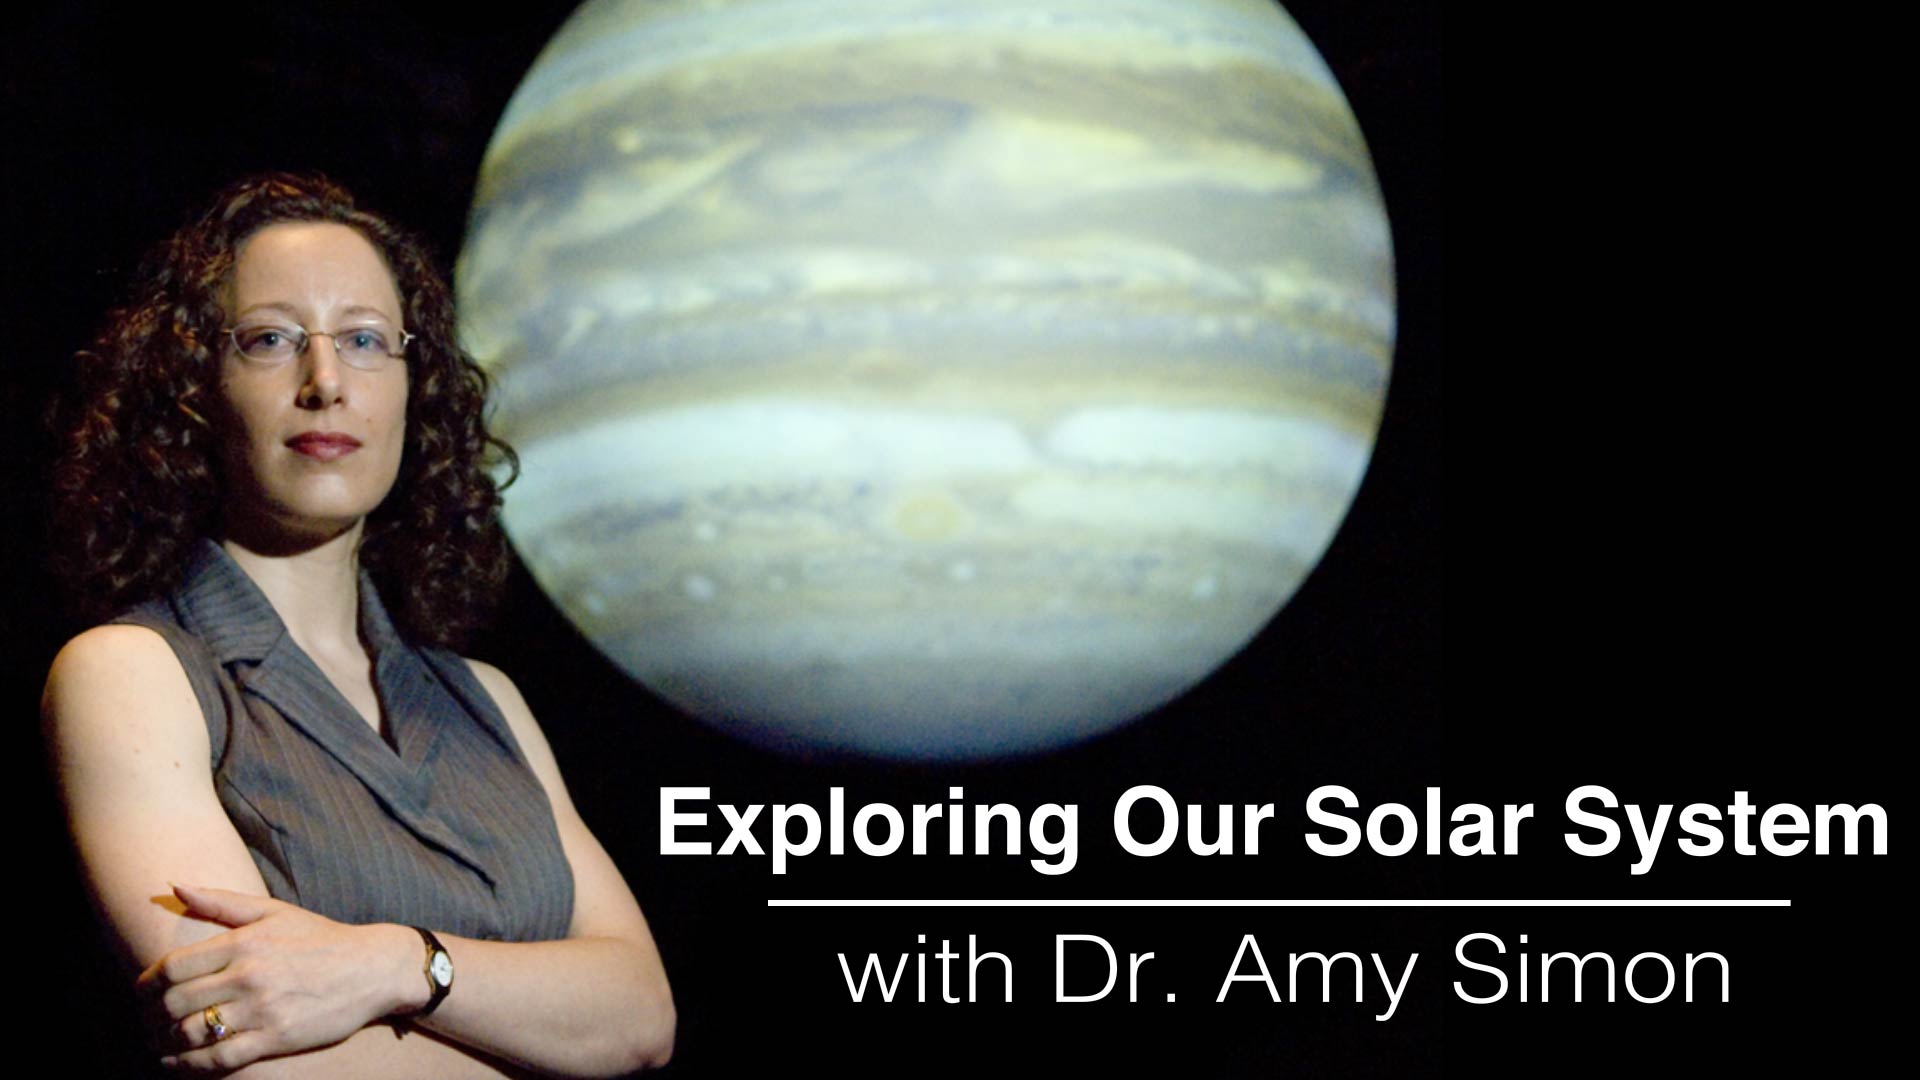 Preview Image for Exploring Our Solar System with Dr. Amy Simon